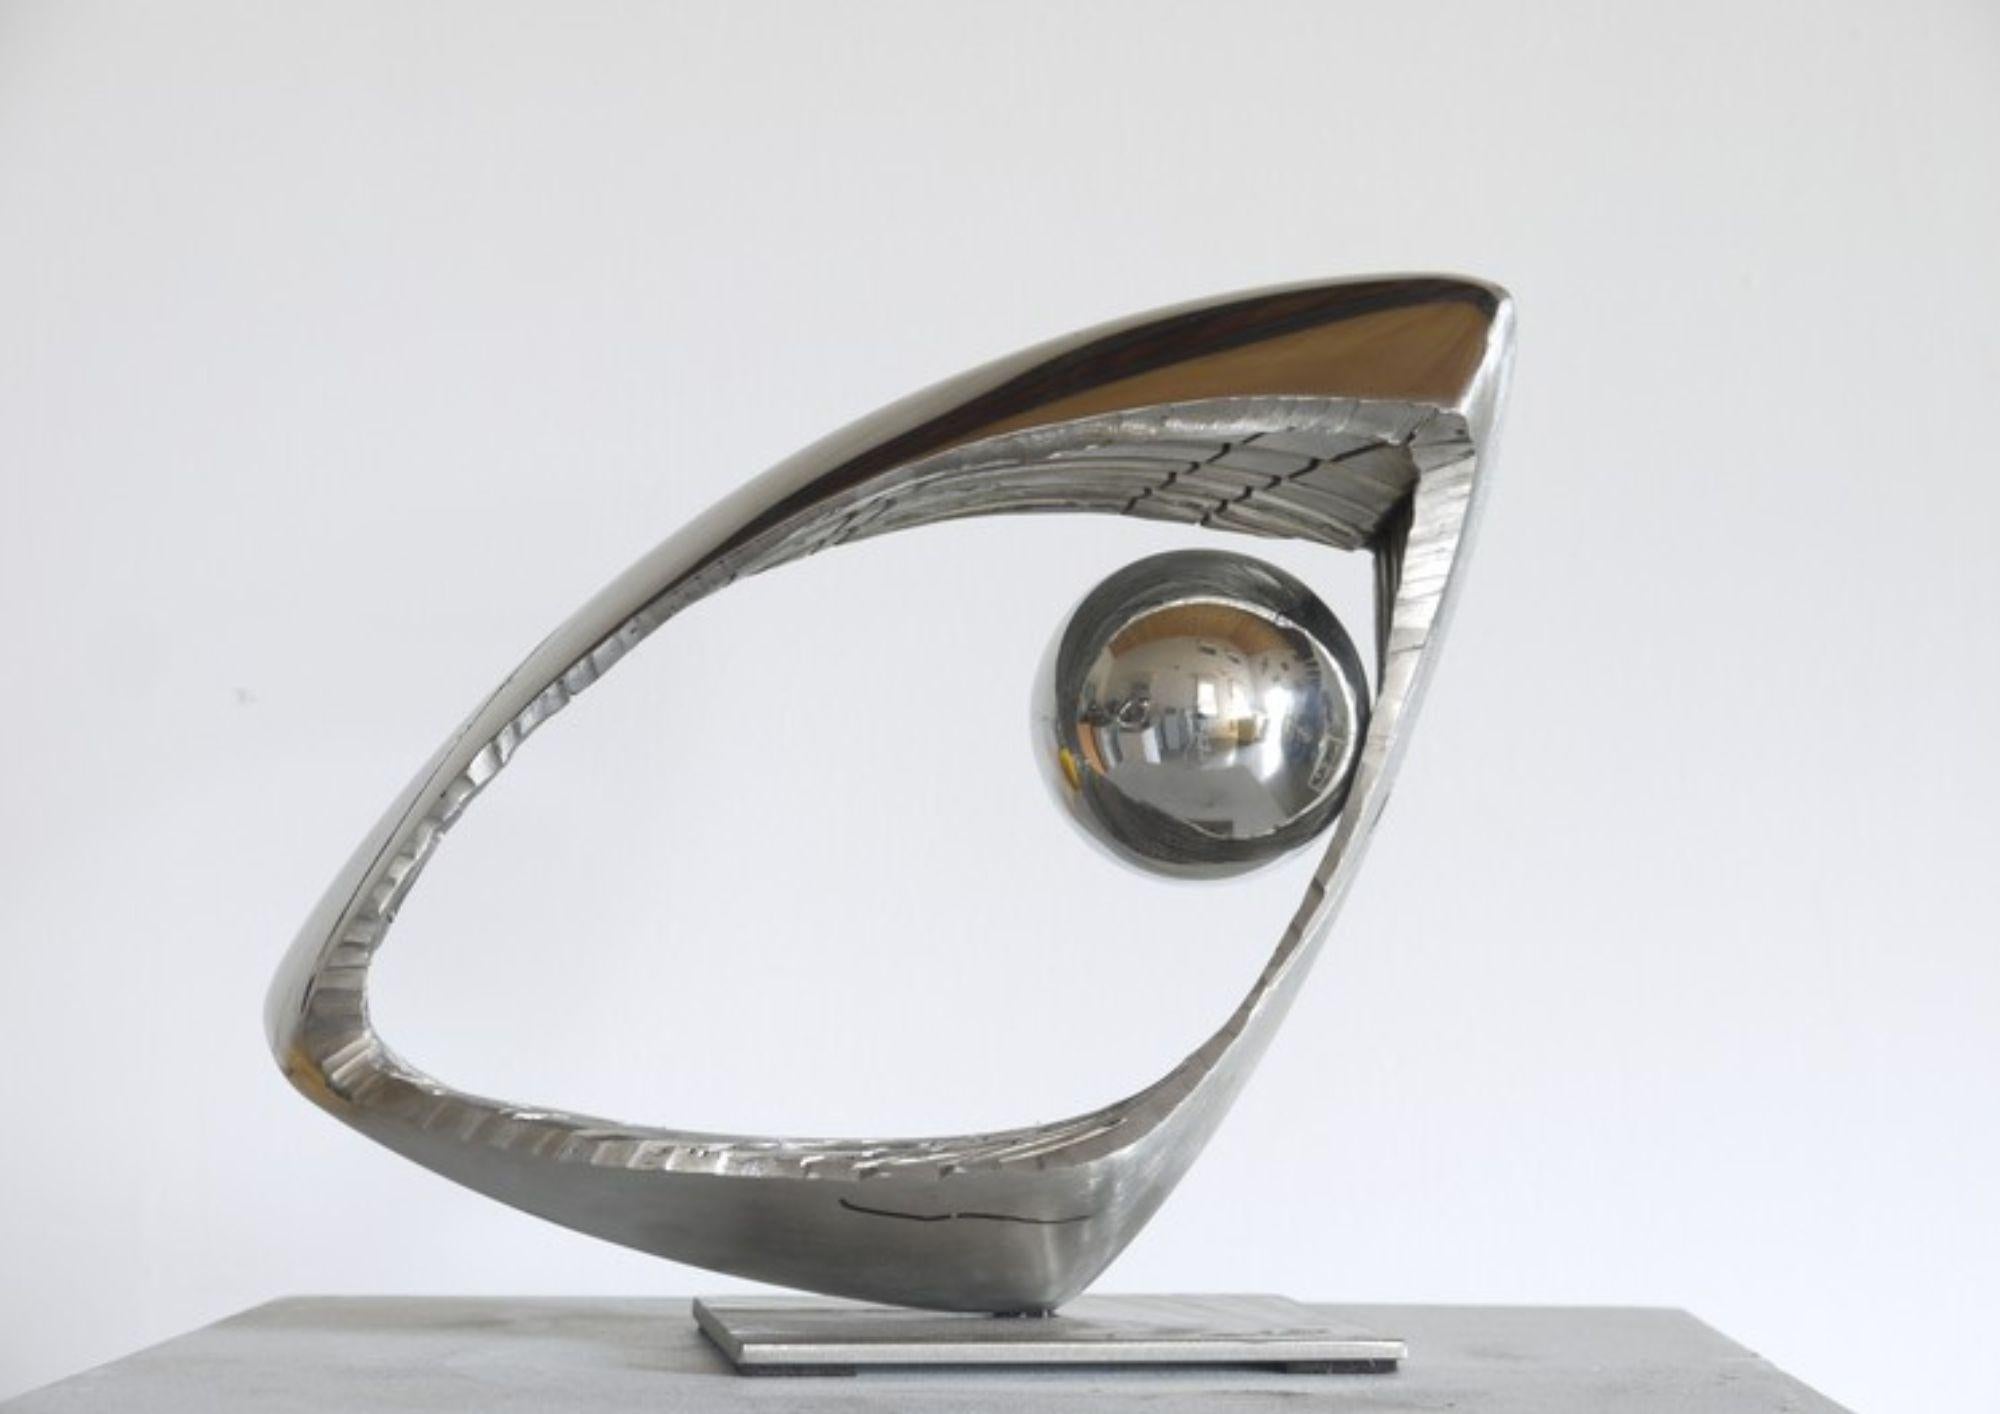 The Mobius 8 sculpture is a work that explores the concepts of circulation, torsion and movement through the Möbius ring. The artist draws inspiration from this fascinating mathematical figure to give life to a sculpture that embodies the infinite